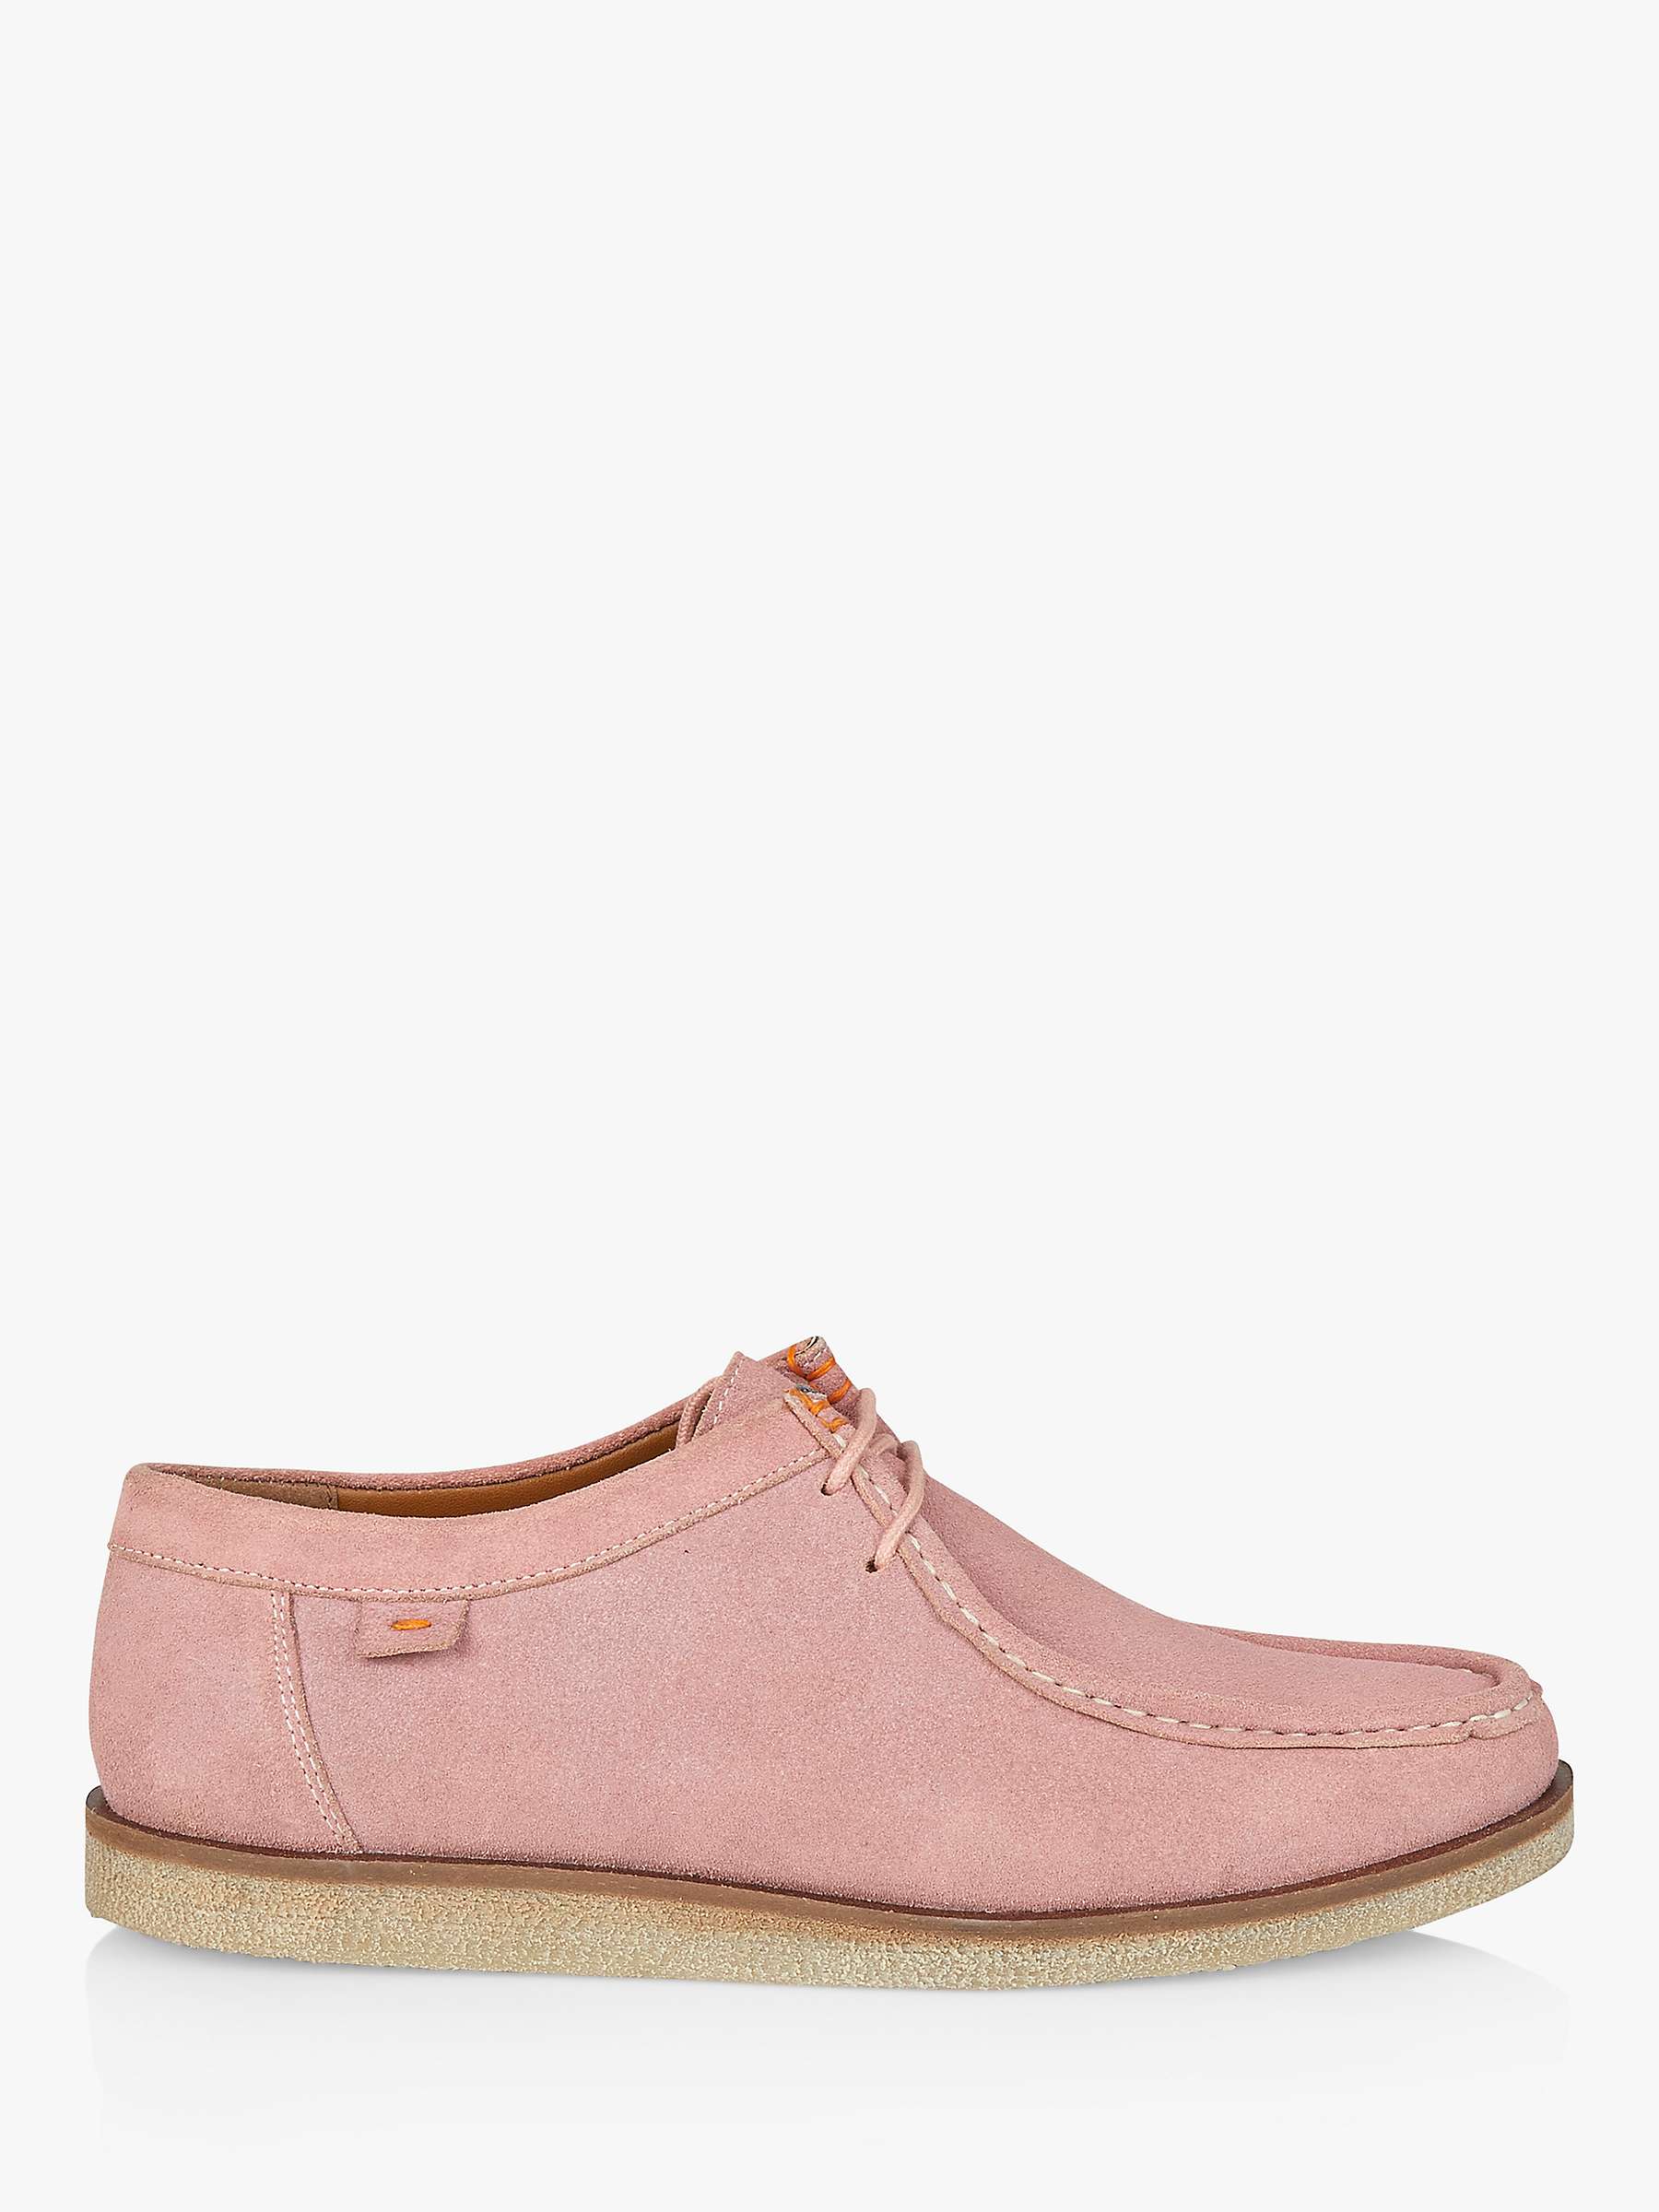 Silver Street London Sydney Suede Moccasin Boots, Pink at John Lewis ...